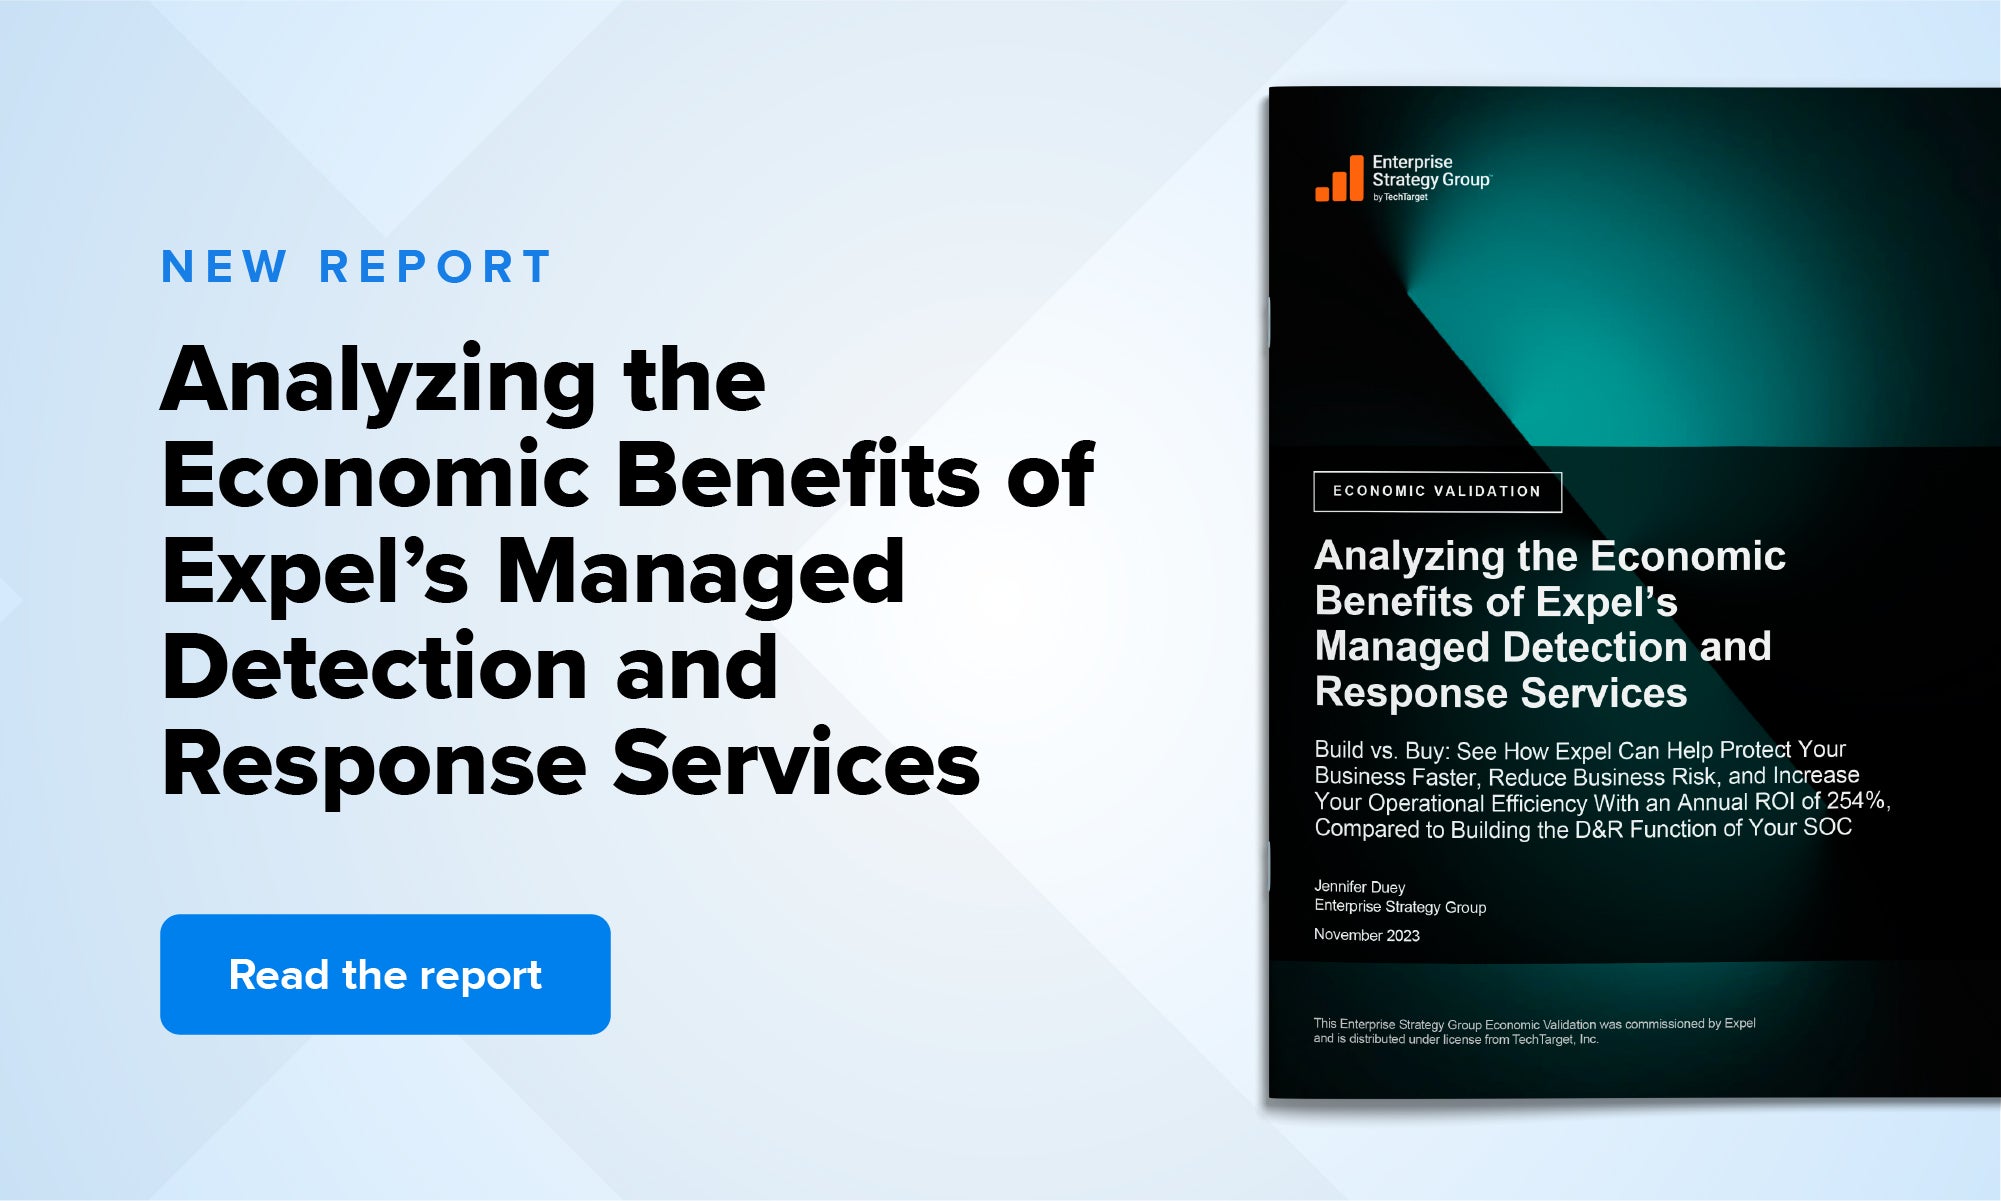 Analyzing the Economic Benefits of Expel’s Managed Detection and Response Services